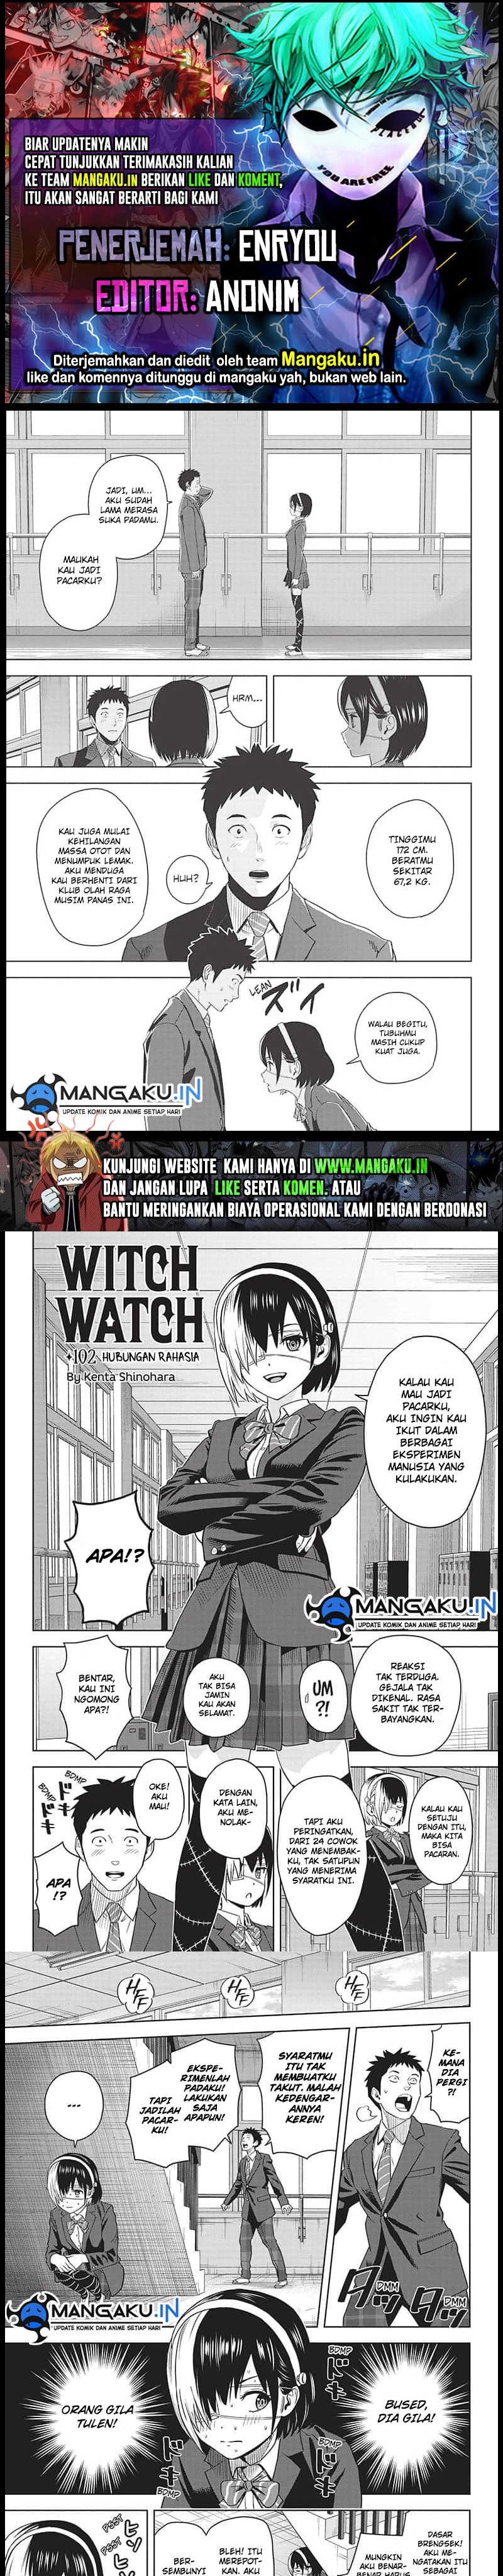 Witch Watch Chapter 102 1